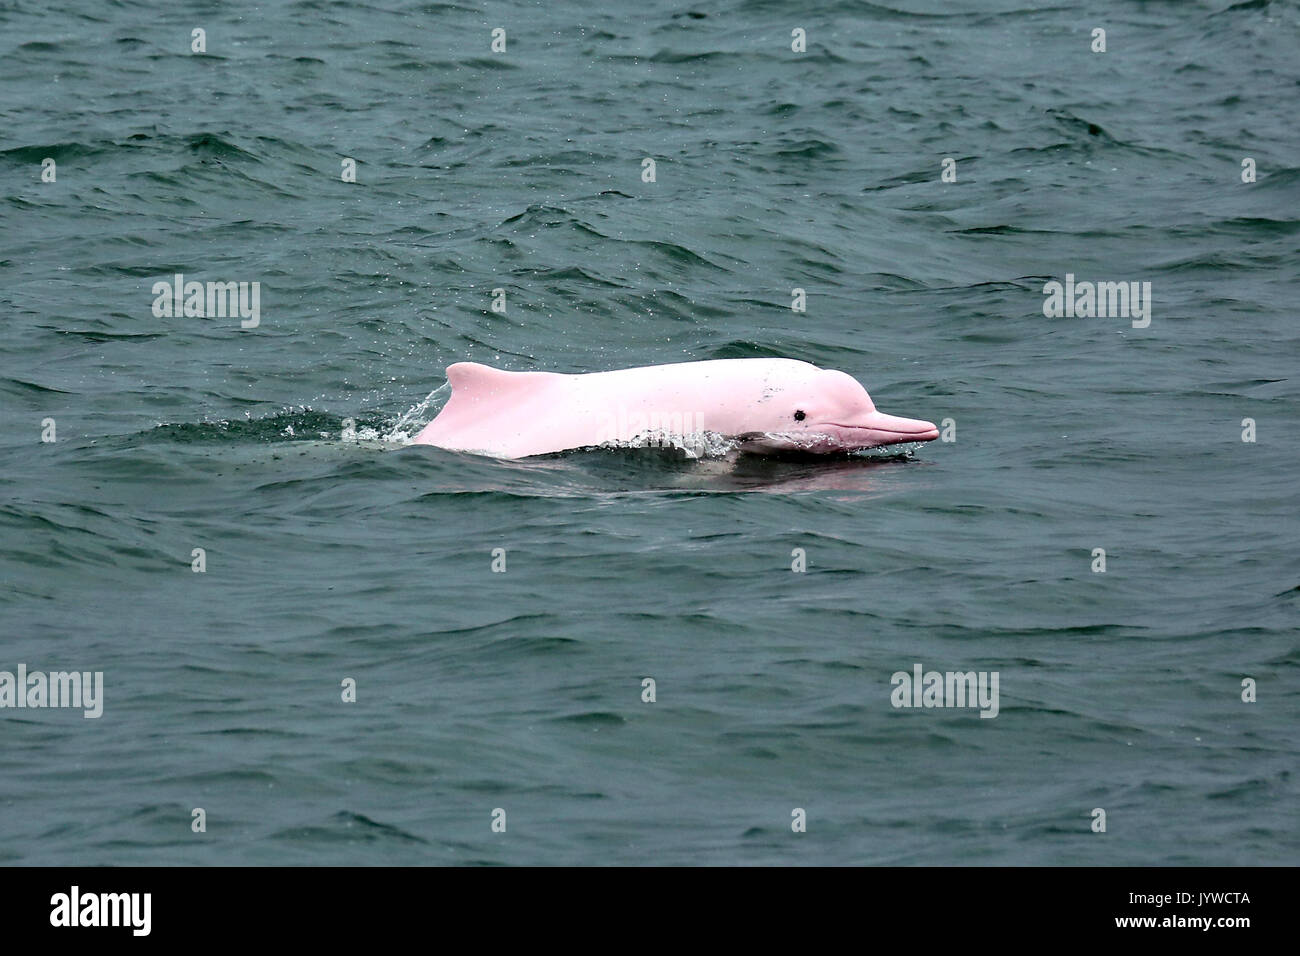 Indo-Pacific Humpback Dolphin (Sousa chinensis) in Hong Kong waters. This coastal species is subject to increasing threats from humans. Stock Photo